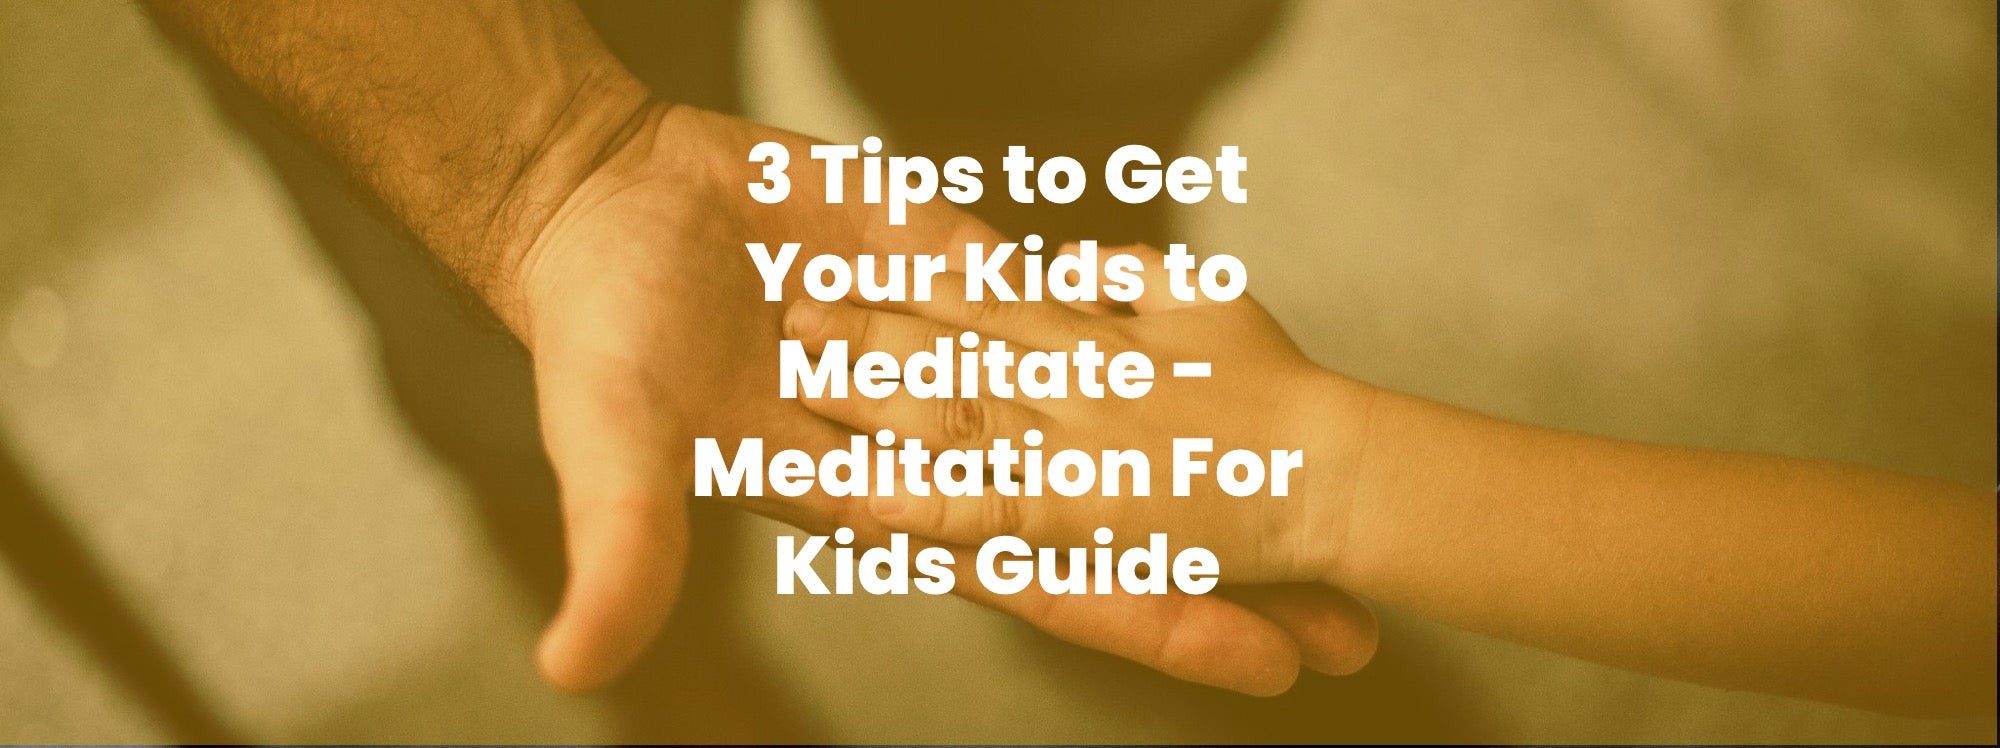 3 Tips to Get Your Kids to Meditate - Meditation For Kids Guide